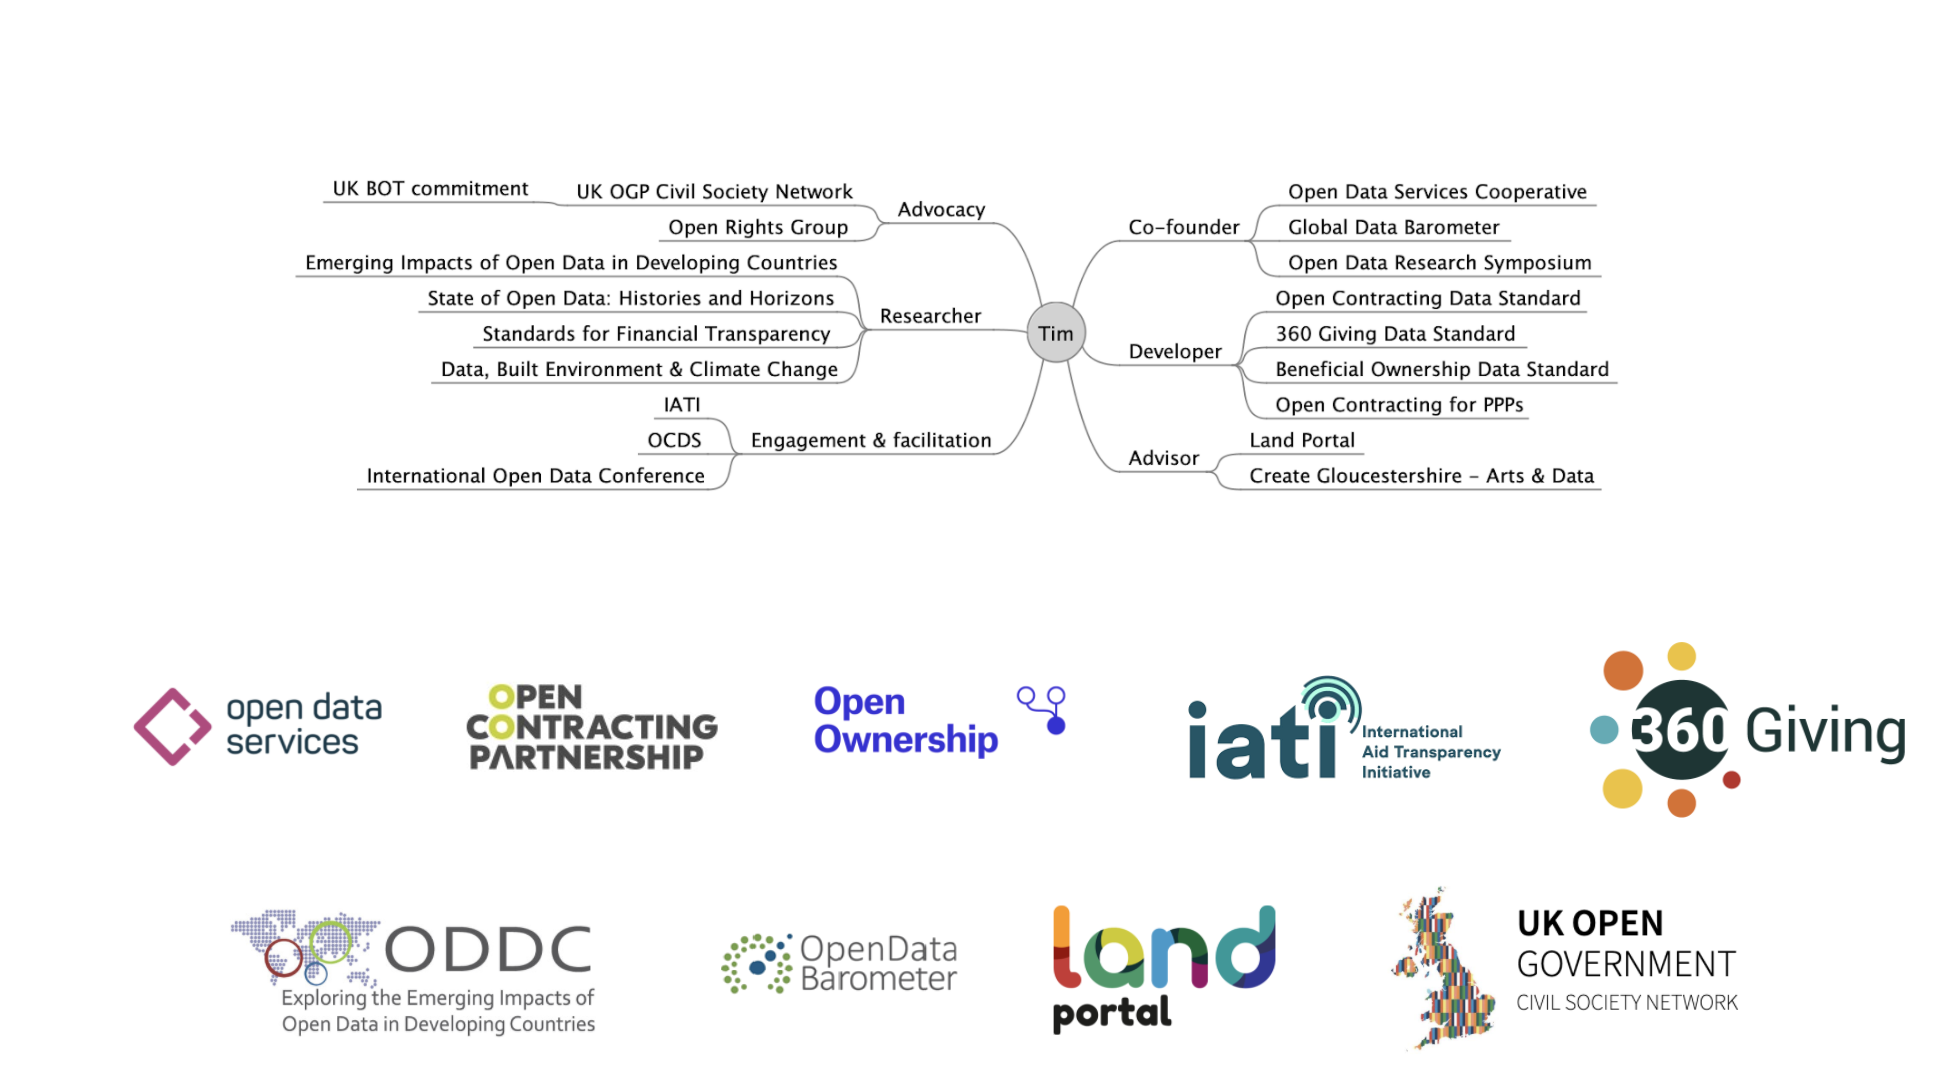 Mind map of Tim's work, and logos of organisations worked with, including: Open Data Services, Open Contracting Partnership, Open Ownership, IATI, 360 Giving, Open Data in Development Countries, Open Data Barometer, Land Portal and UK Open Government Civil Society Network. 